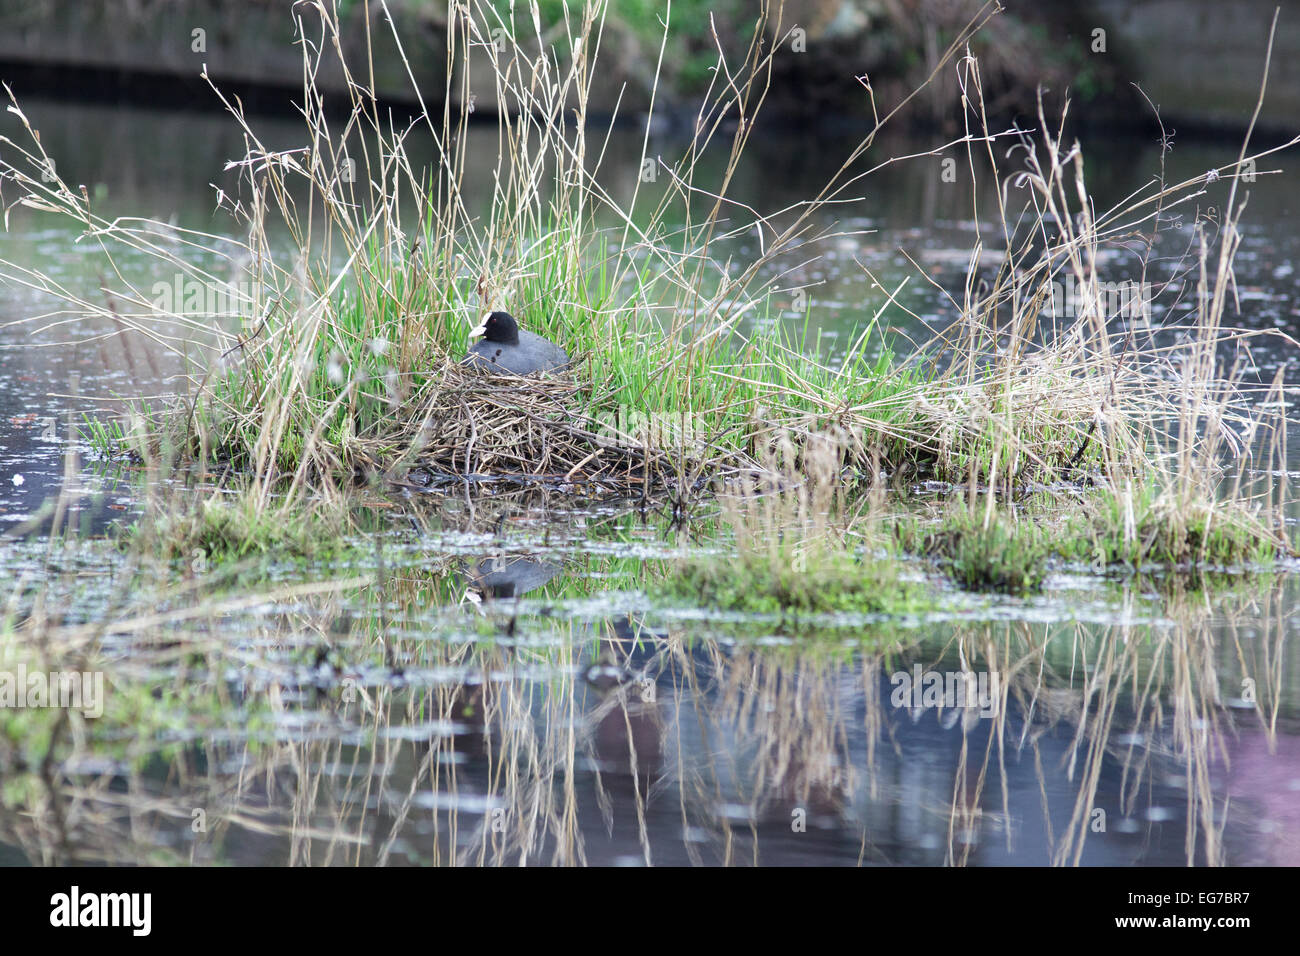 Fulica atra. The nest of the Common Coot in nature. Wildeshausen (Low Saxon: Wilshusen), Lower Saxony, Germany. Stock Photo